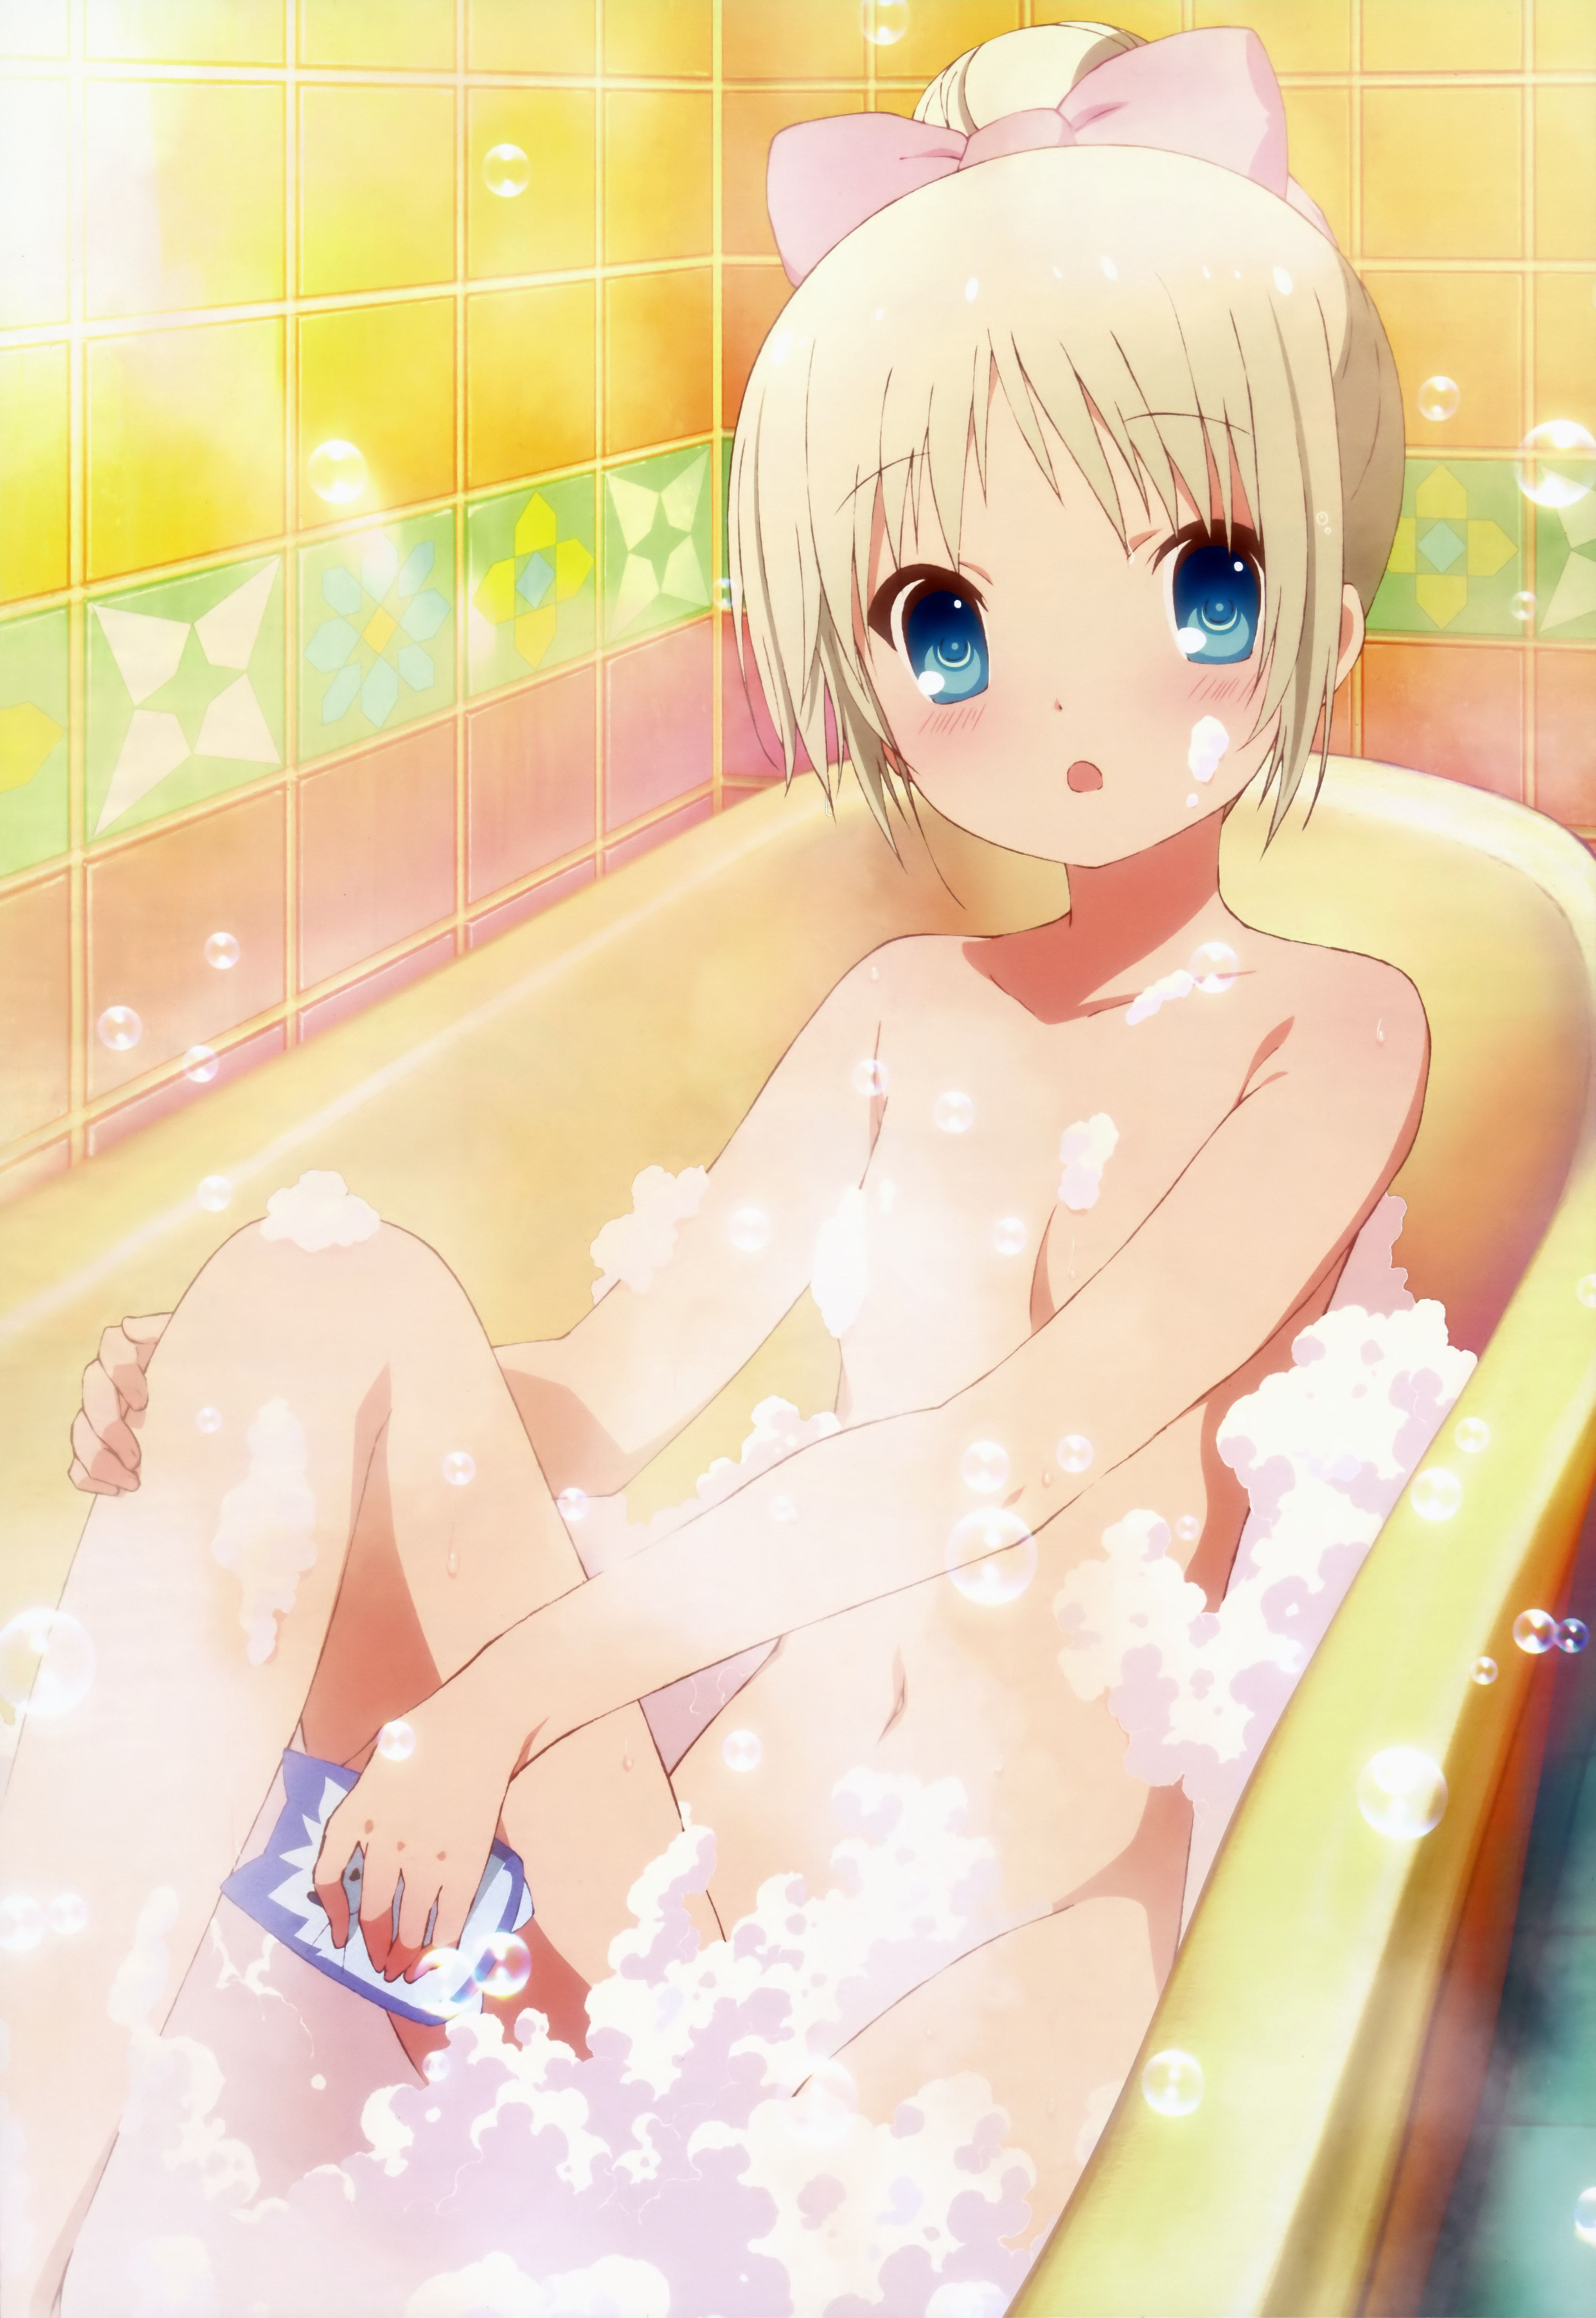 Don't you want to see the girl taking a bath? Don't you want to see a girl doing something in the bathroom? I want to see! 【Two-Dimensional】 26